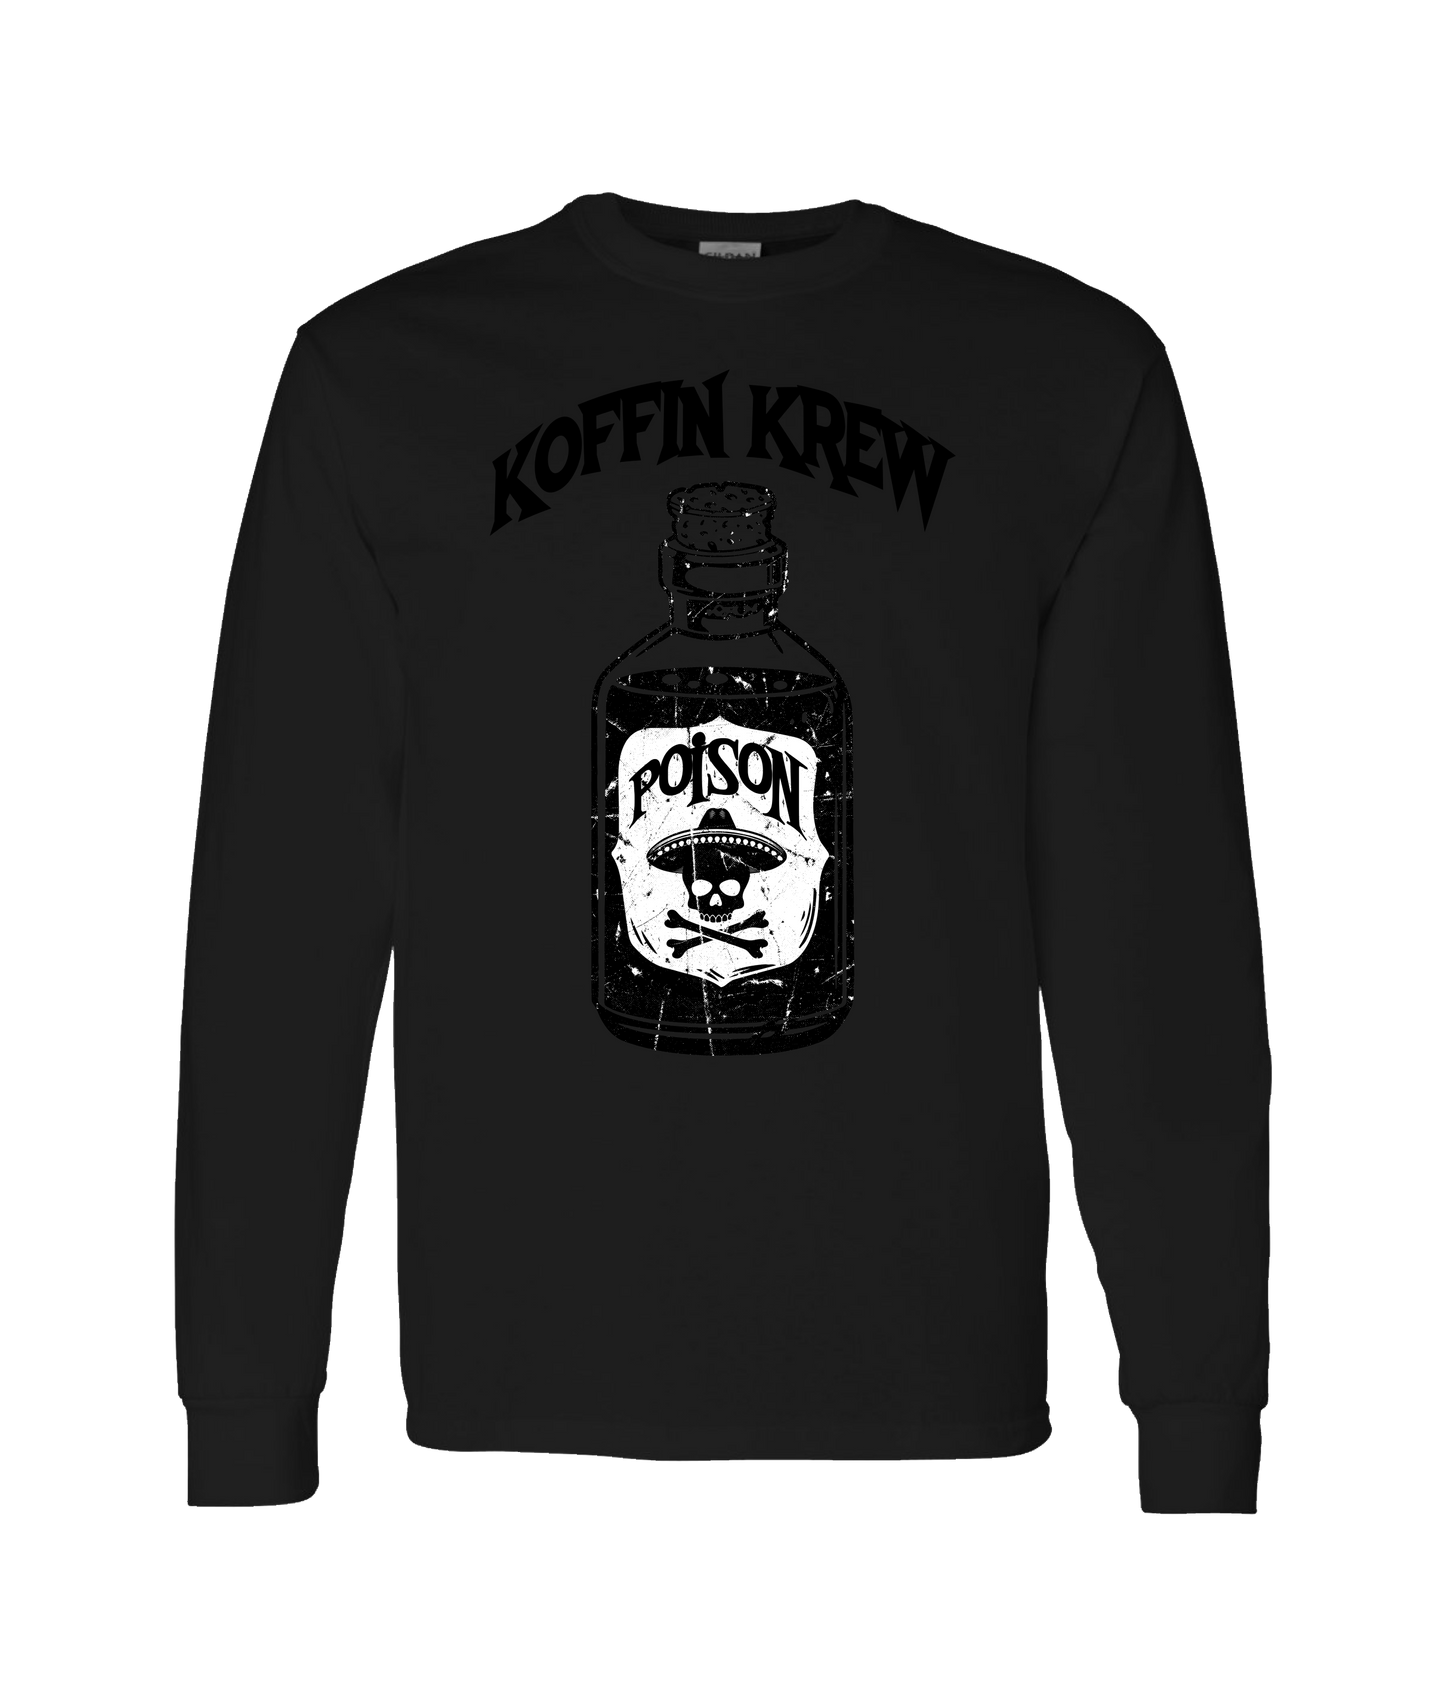 Koffin Krew Apparel - Pick Your Poison - Black Long Sleeve T